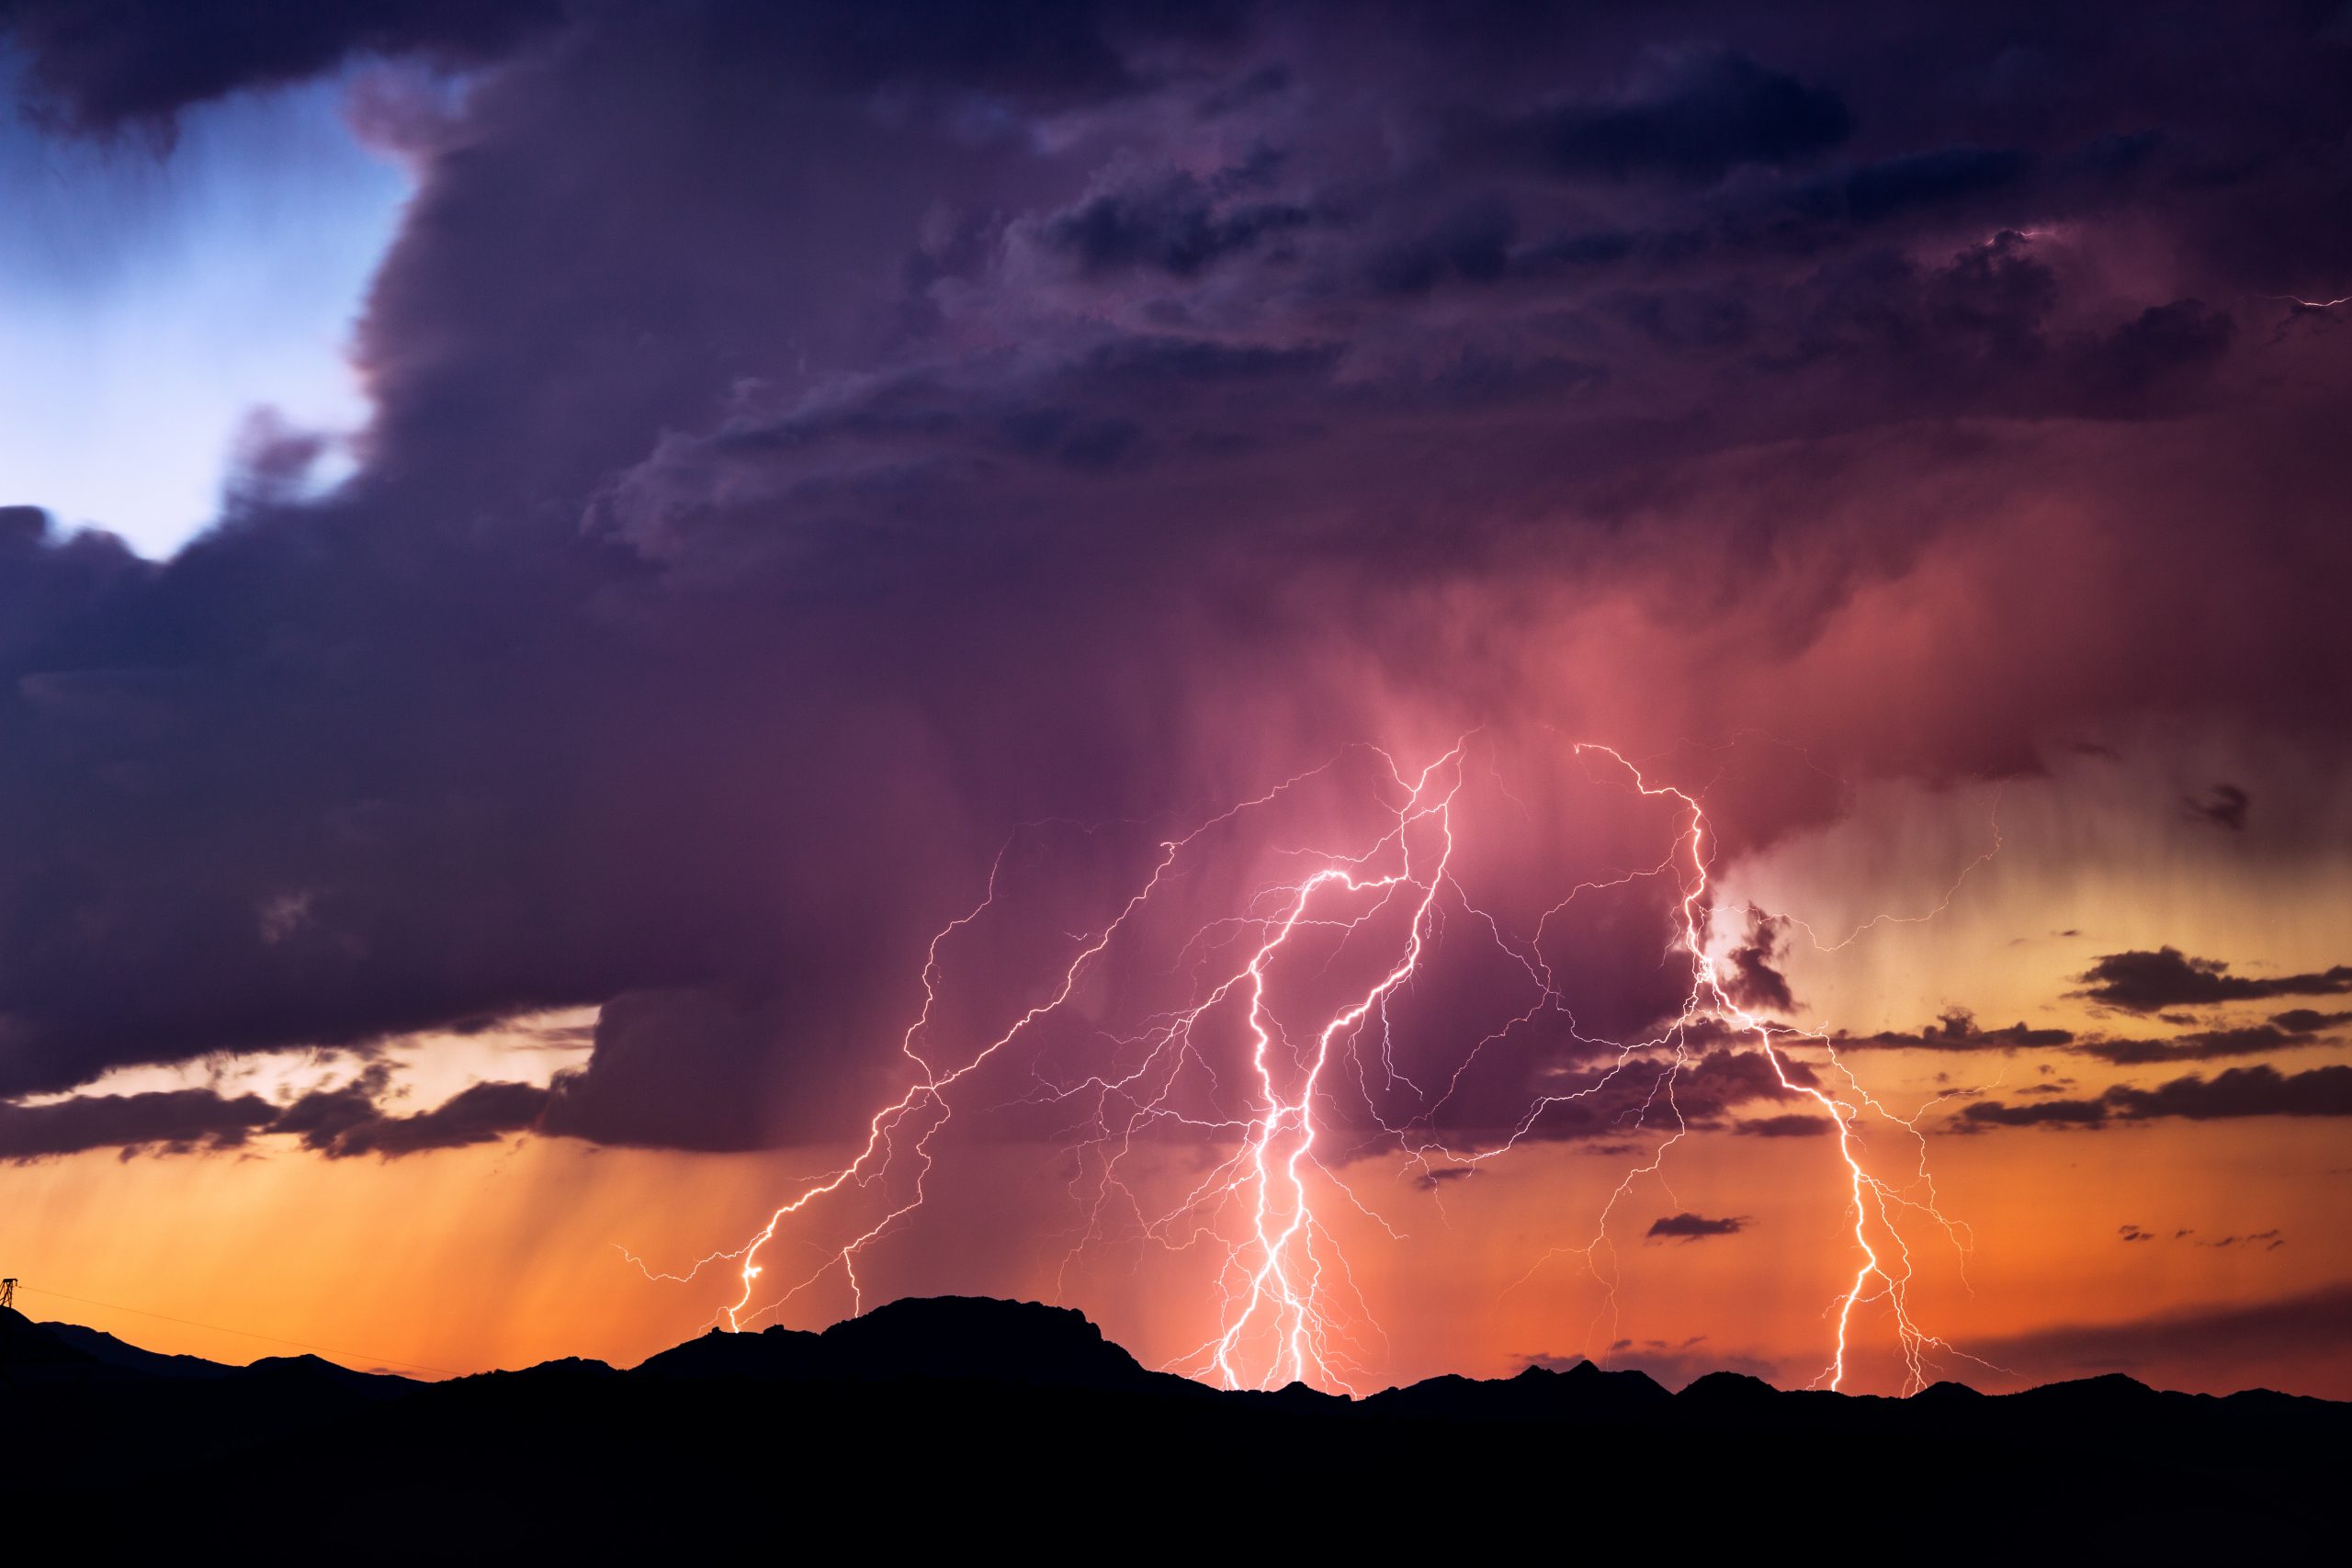 colorful storm clouds with powerful lightning strikes